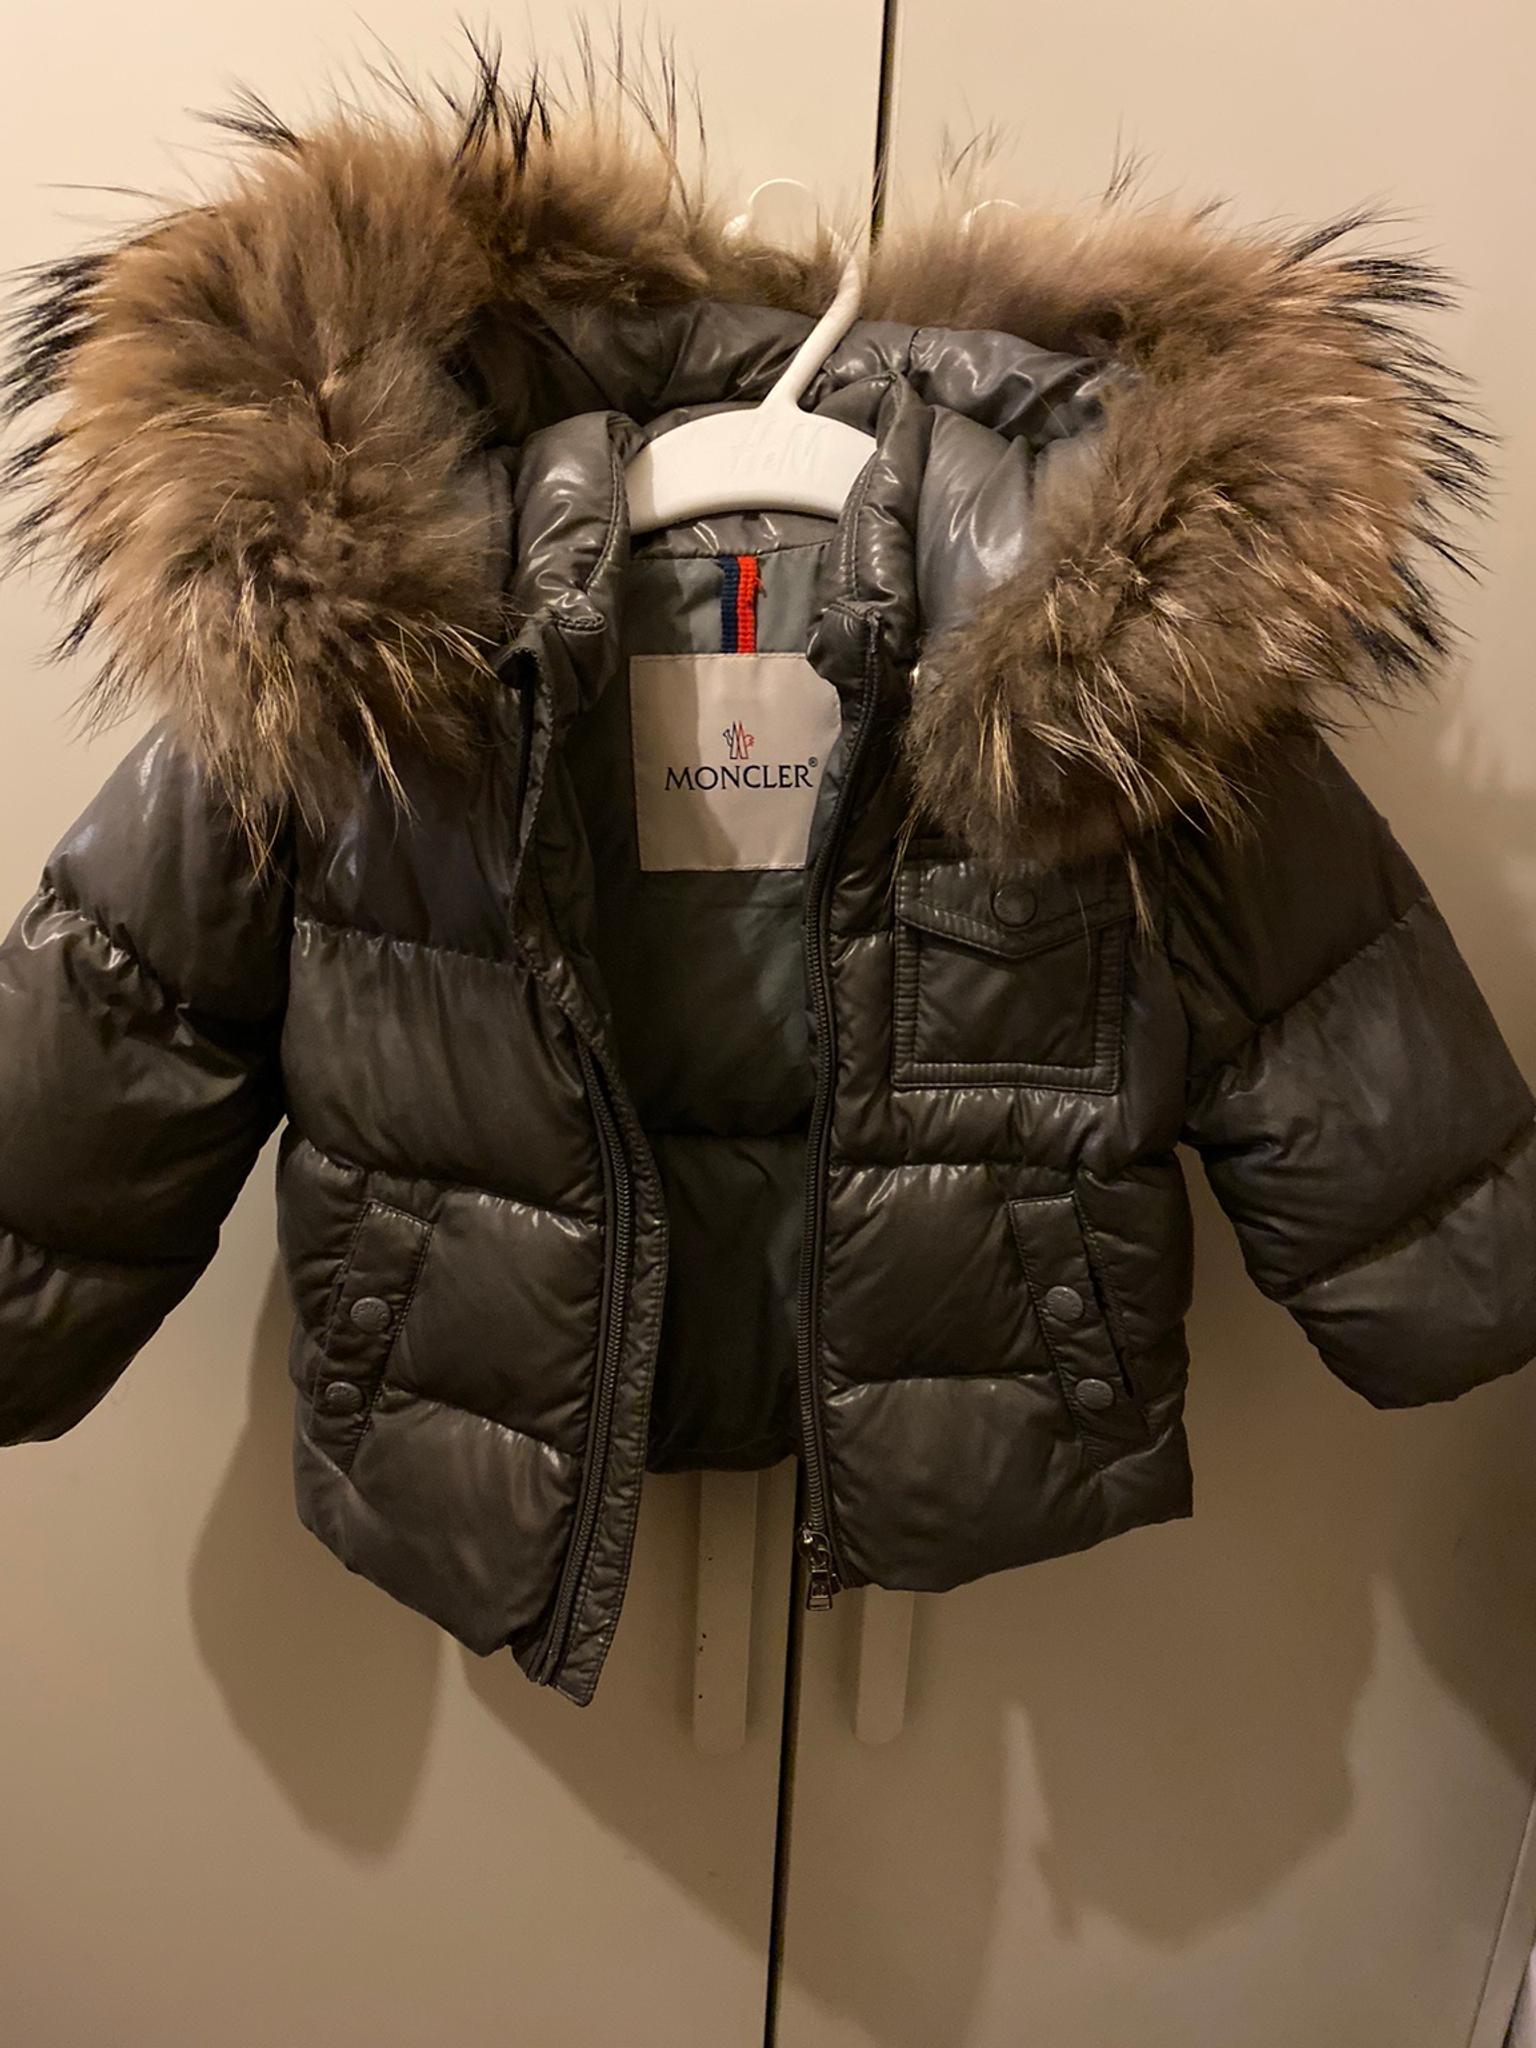 Baby moncler coat in RM1 Havering for 